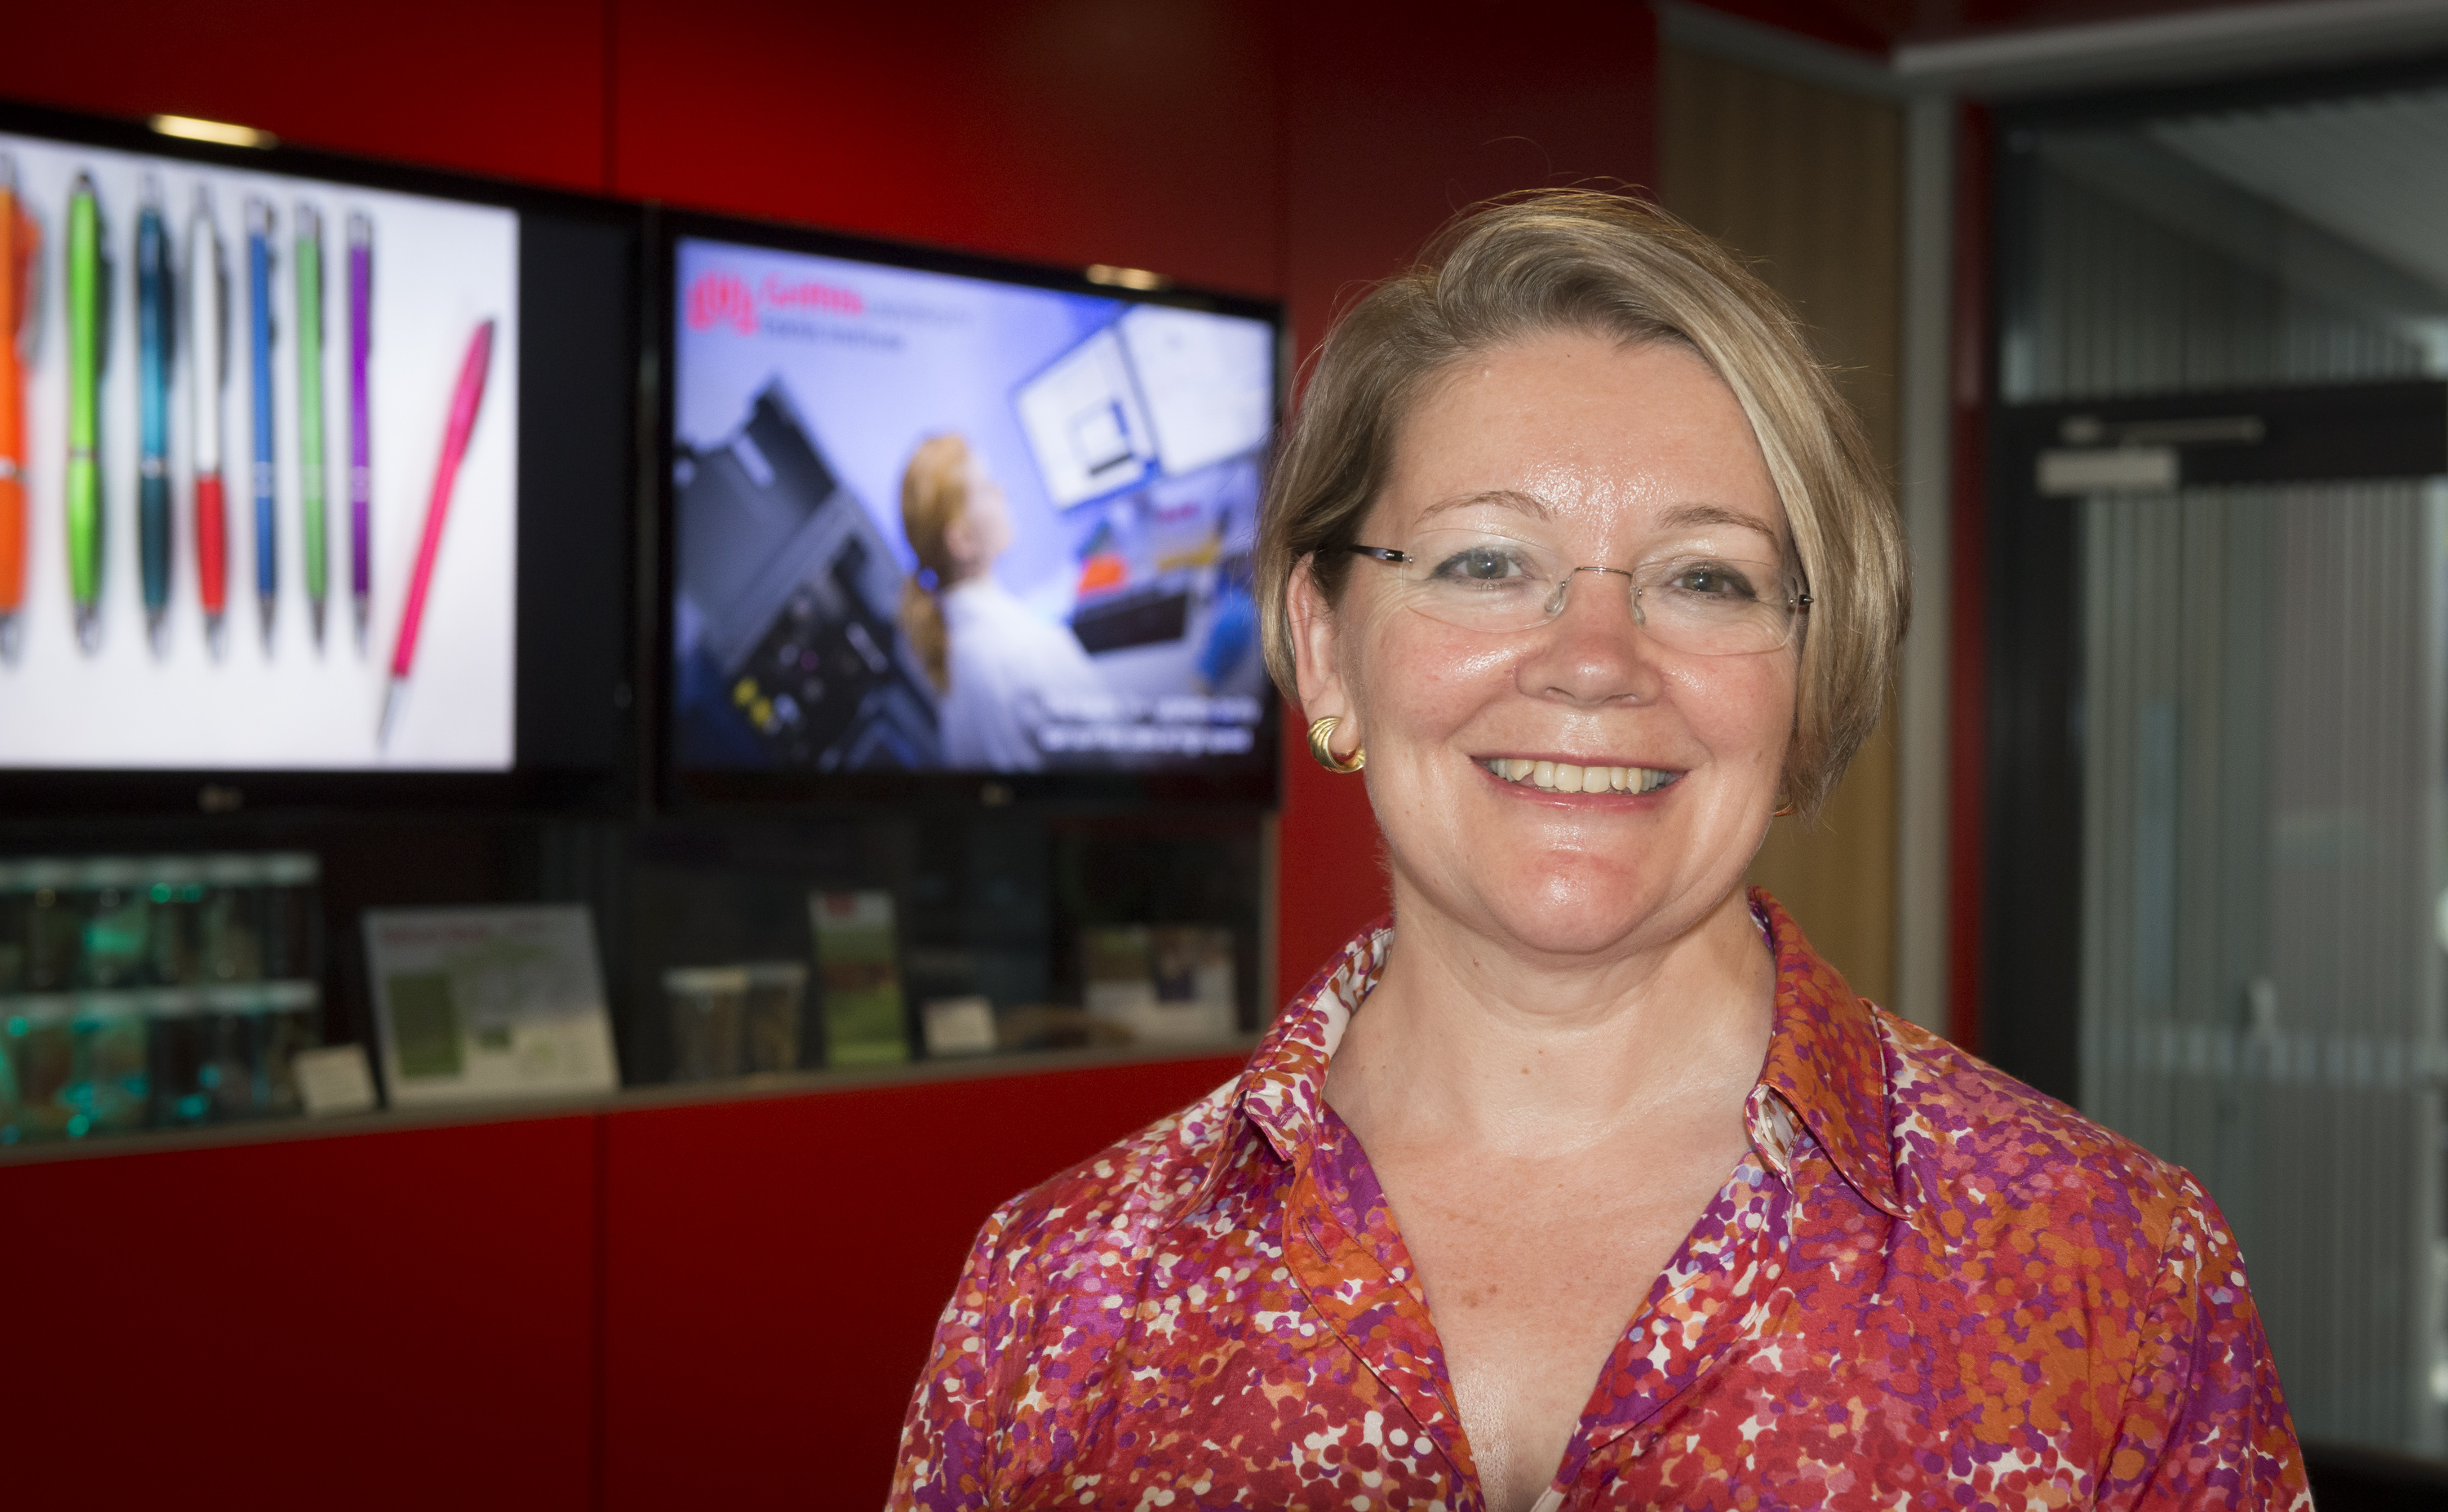 The new Director for the Griffith Institute for Drug Discovery, Professor Jennifer Martin